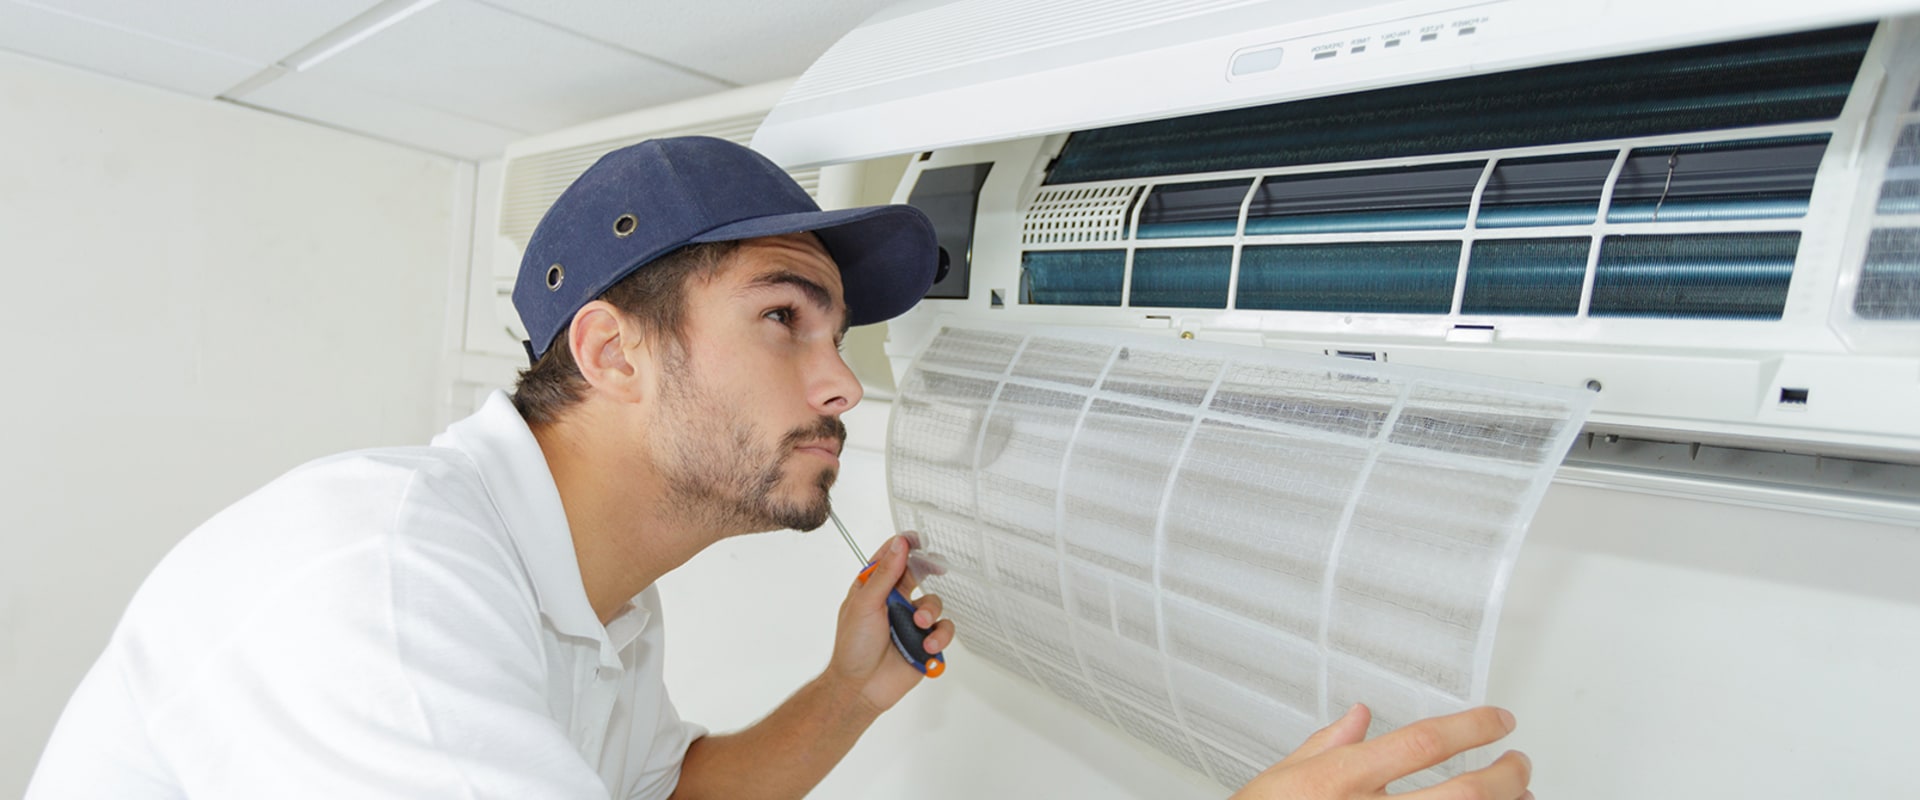 Hiring an Air Duct Repair Service in Miami Beach, FL: What Qualifications to Look For